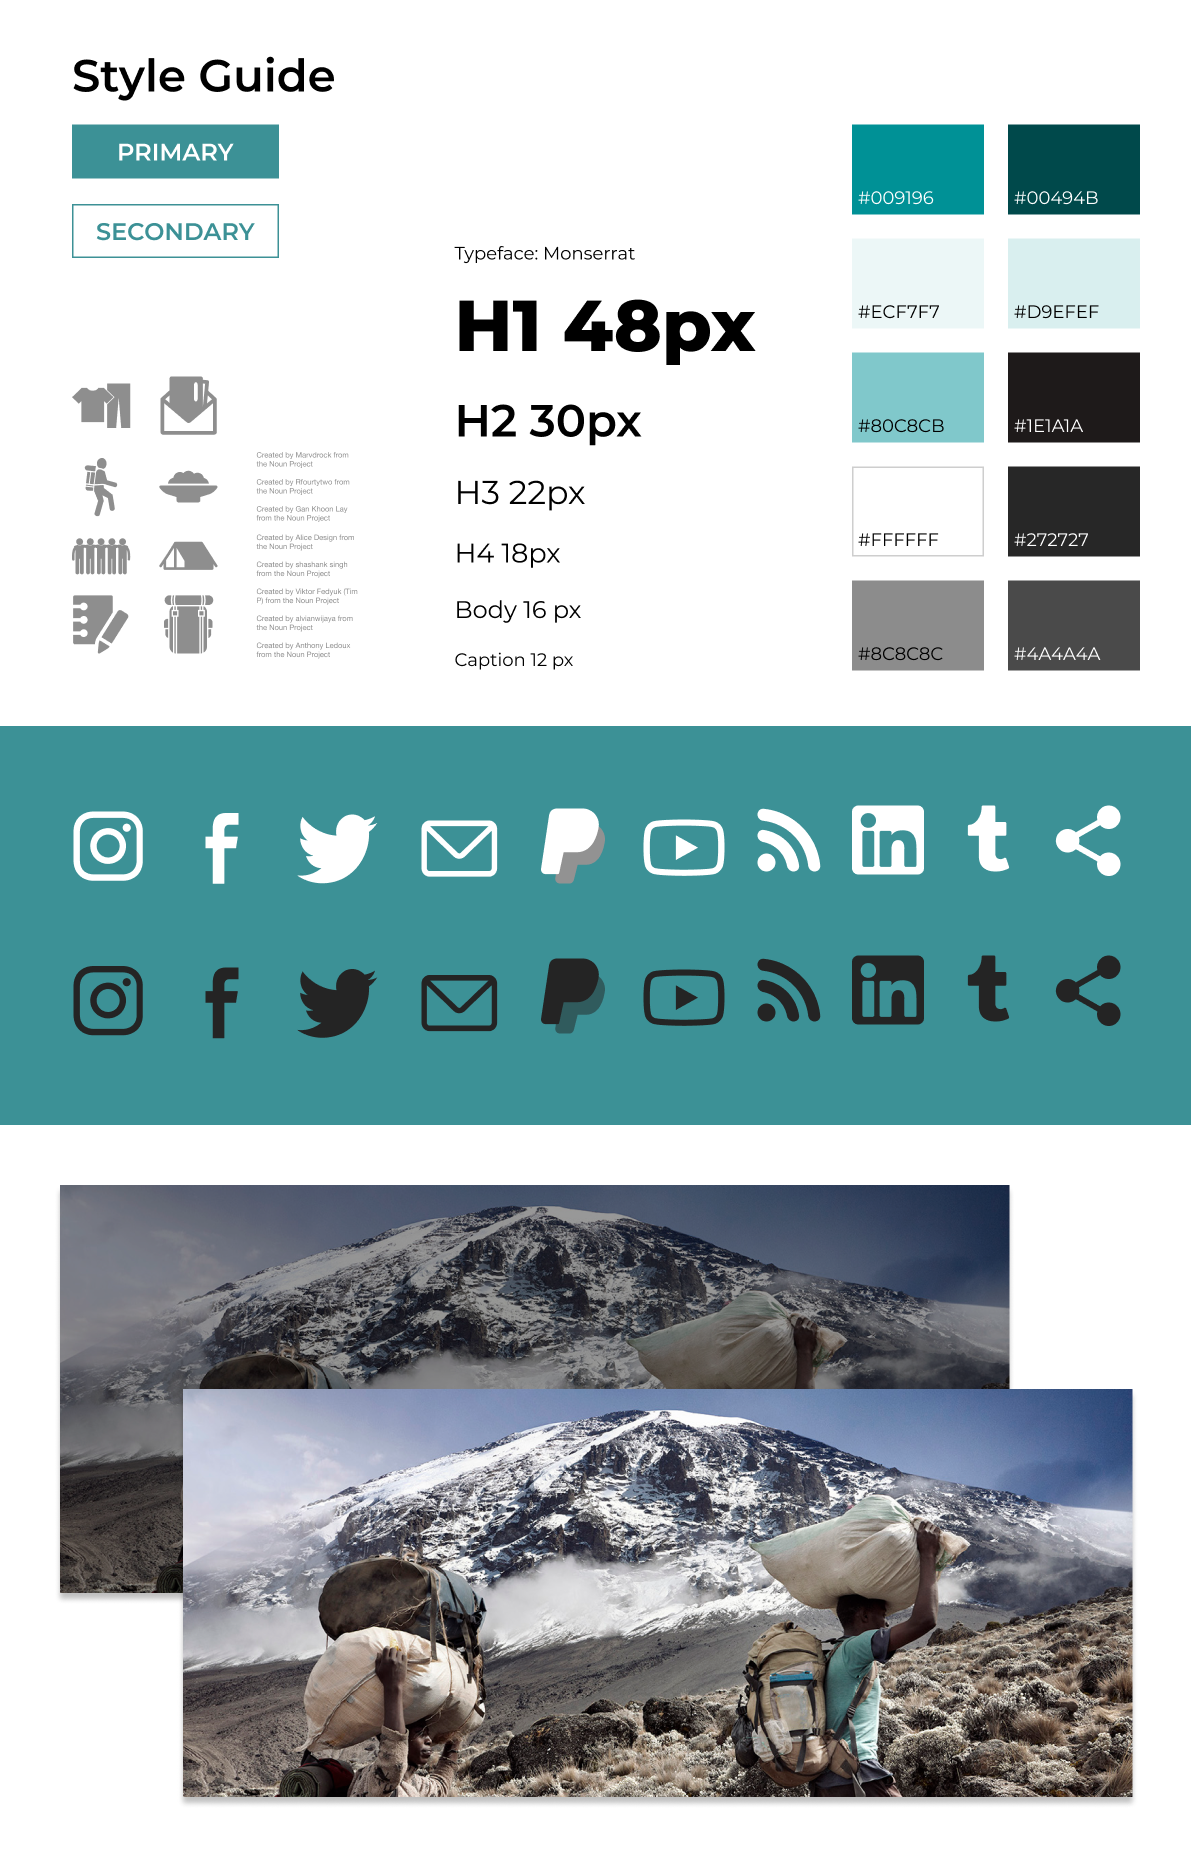 Image of style guide assets, including typography, color, buttons and image treatment